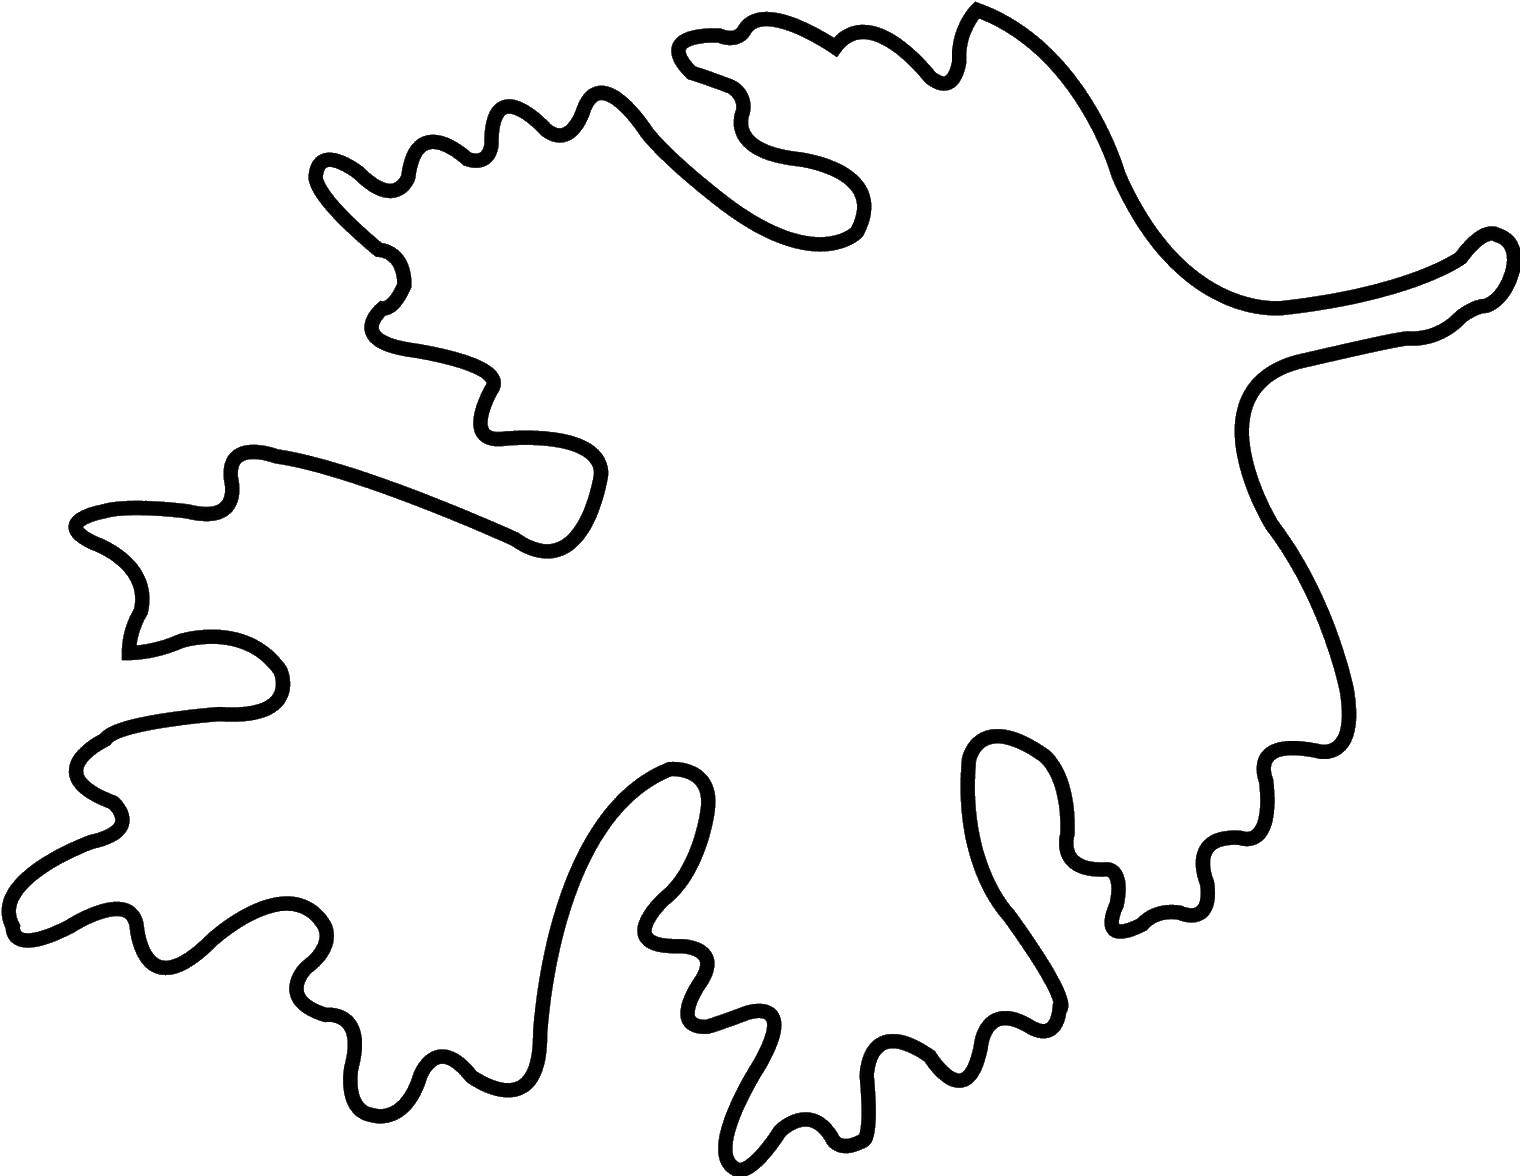 Coloring Sheet. Category The contours of the leaves of the trees. Tags:  the contours of the leaves.